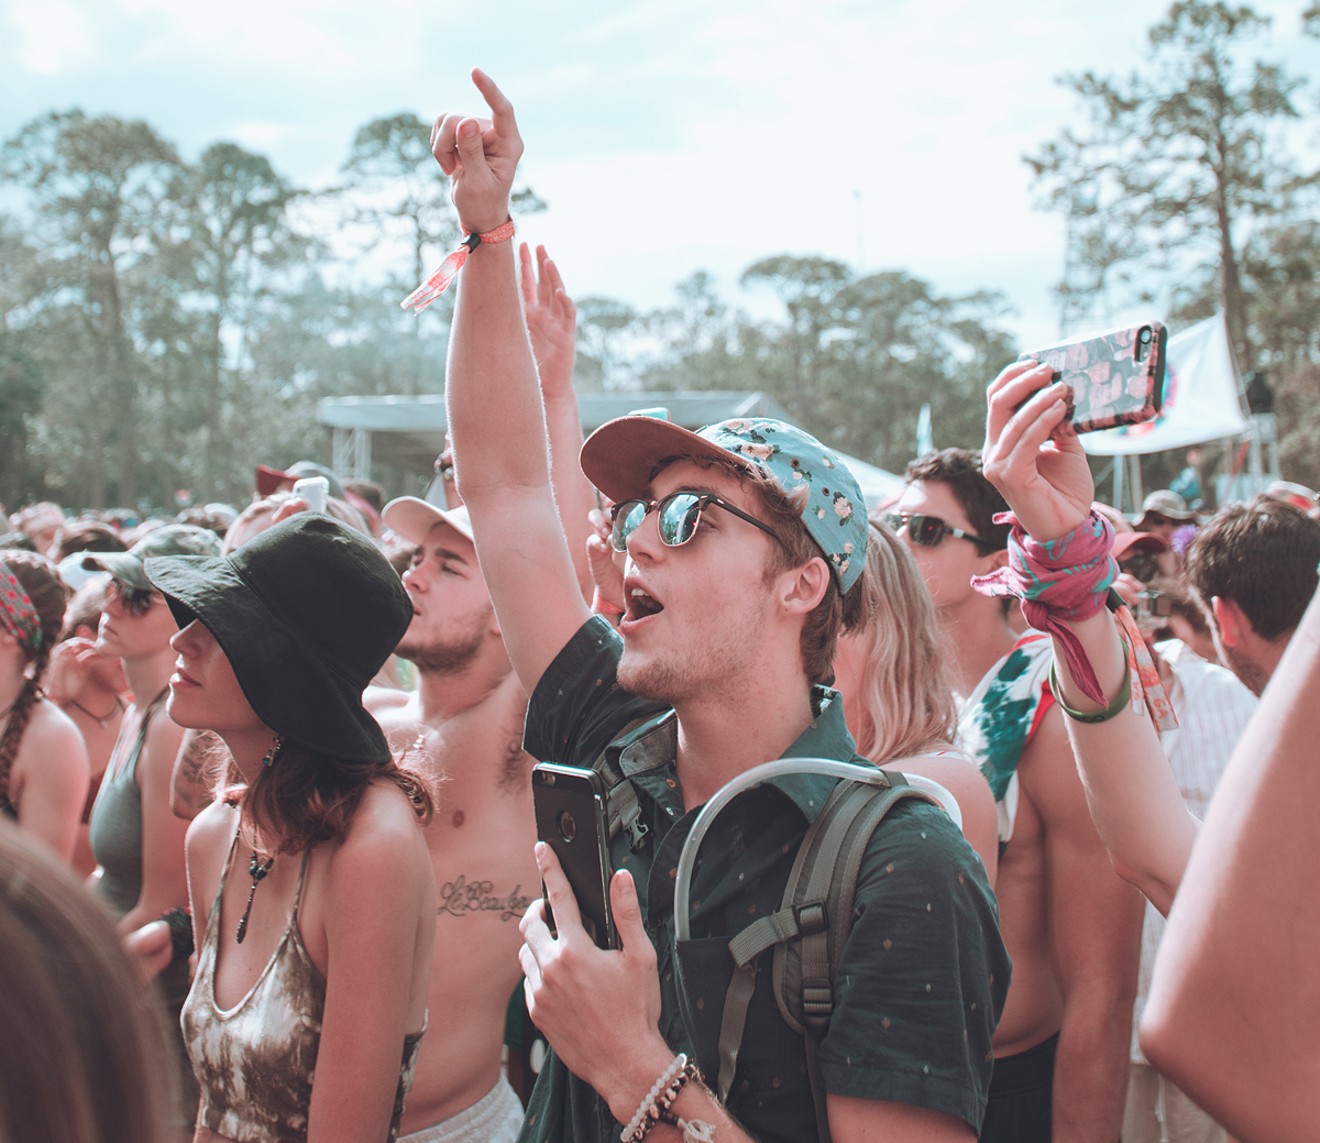 Let it all hang out at Okeechobee Music & Arts Festival.